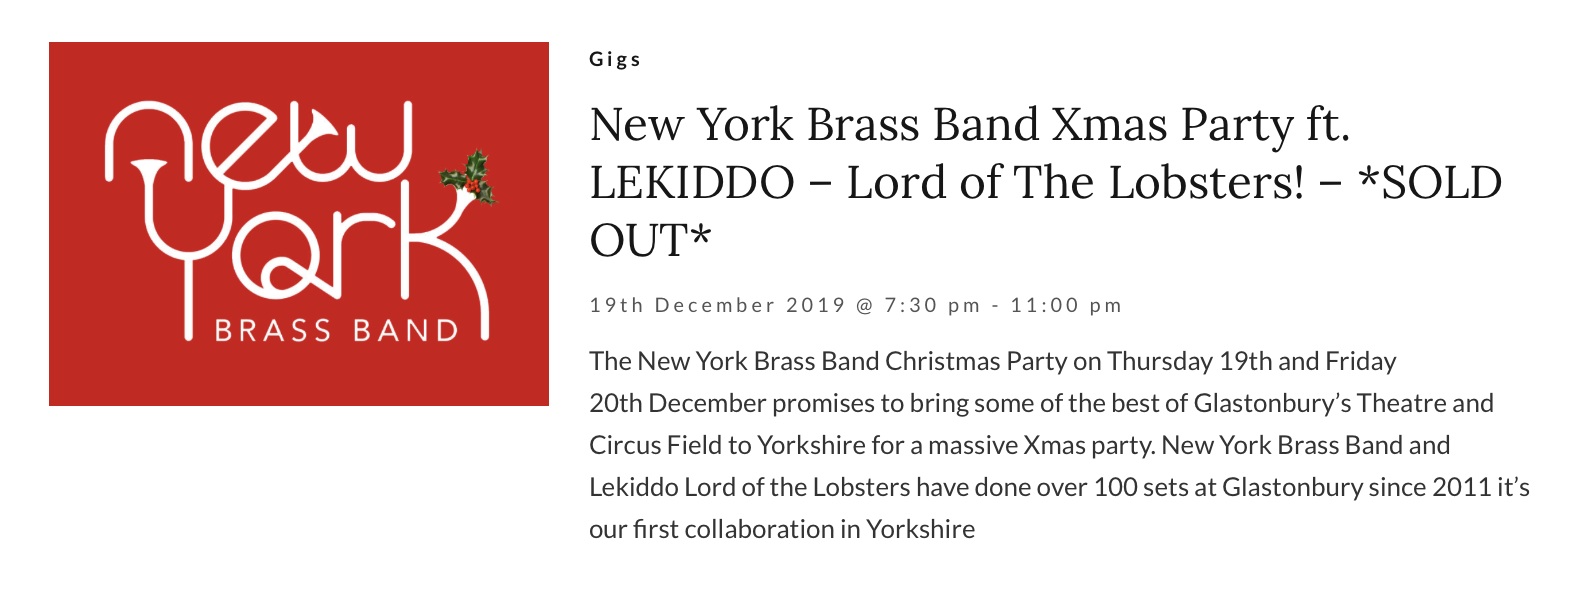 New York Brass Band Xmas Party ft. LEKIDDO â€“ Lord of The Lobsters! â€“ *SOLD OUT*